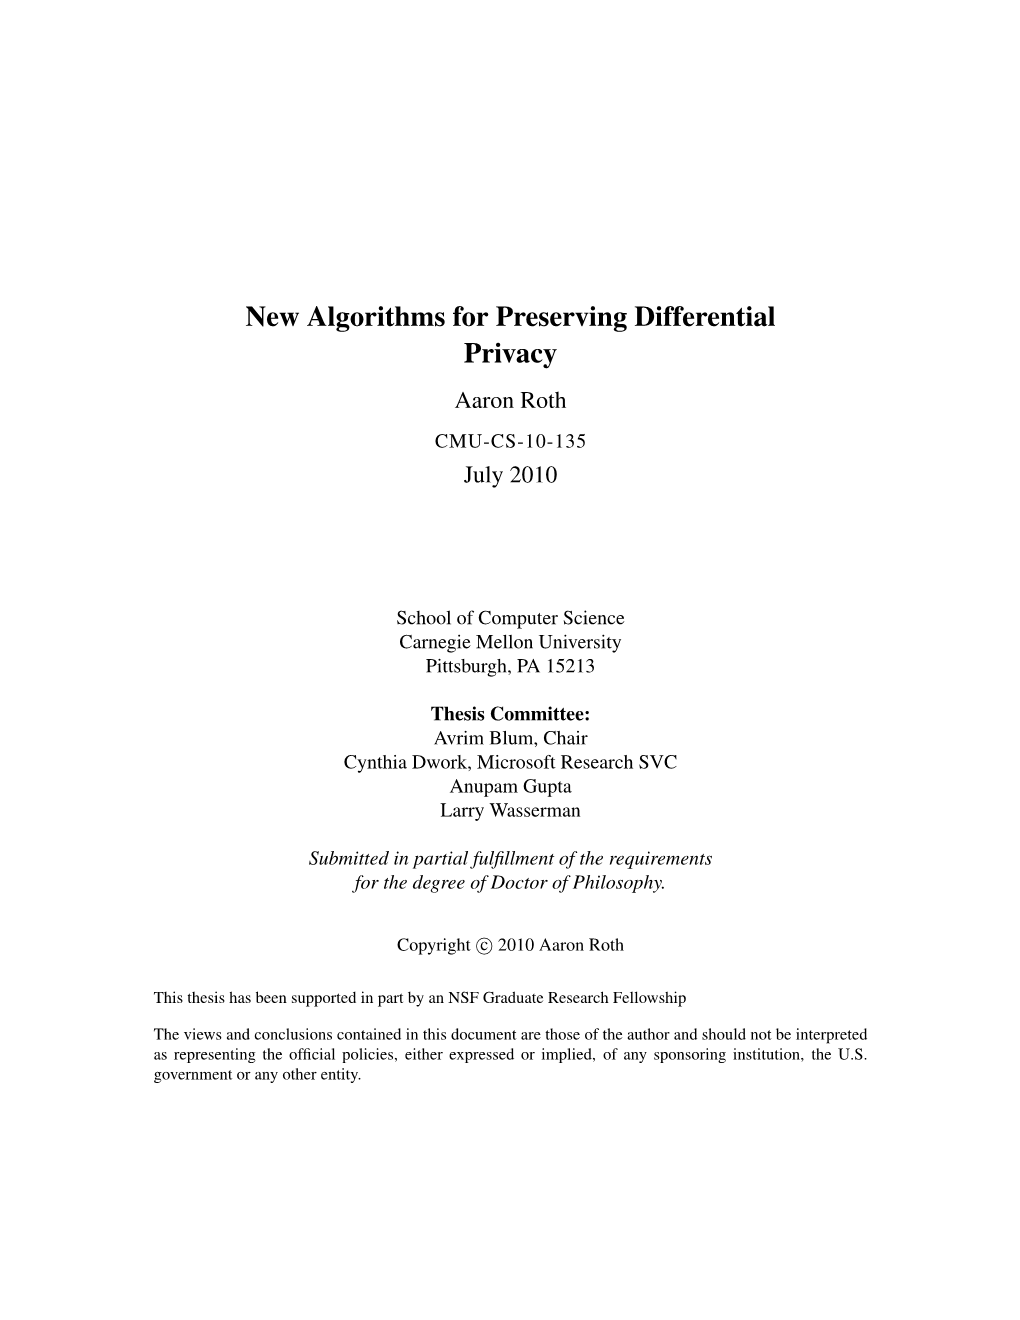 New Algorithms for Preserving Differential Privacy Aaron Roth CMU-CS-10-135 July 2010